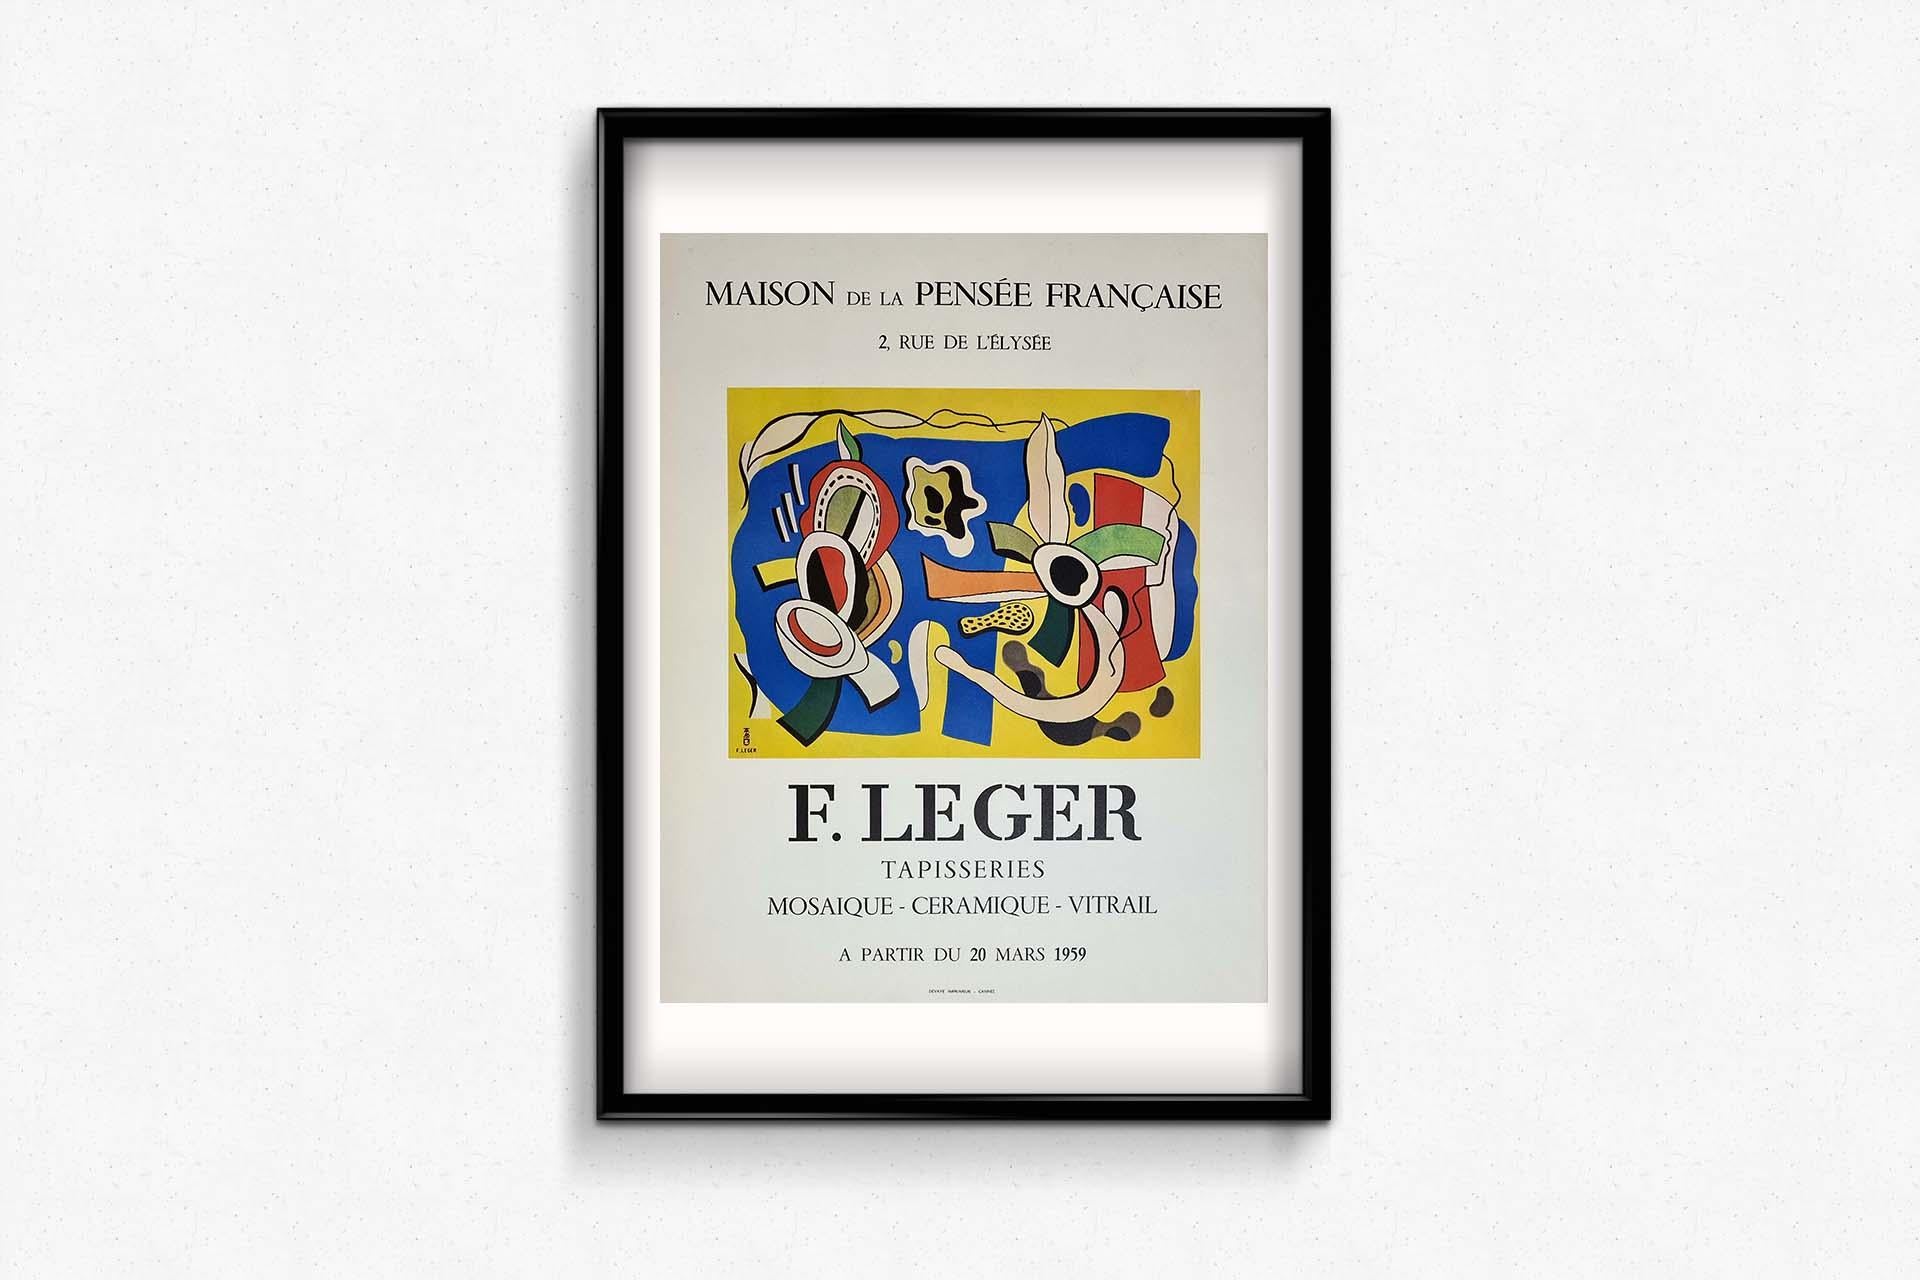 Fernand Léger, a towering figure in 20th-century art, left an indelible mark through his diverse and dynamic body of work. Born on February 4, 1881, in Argentan, France, Léger's artistic journey culminated in the creation of the 1959 exhibition